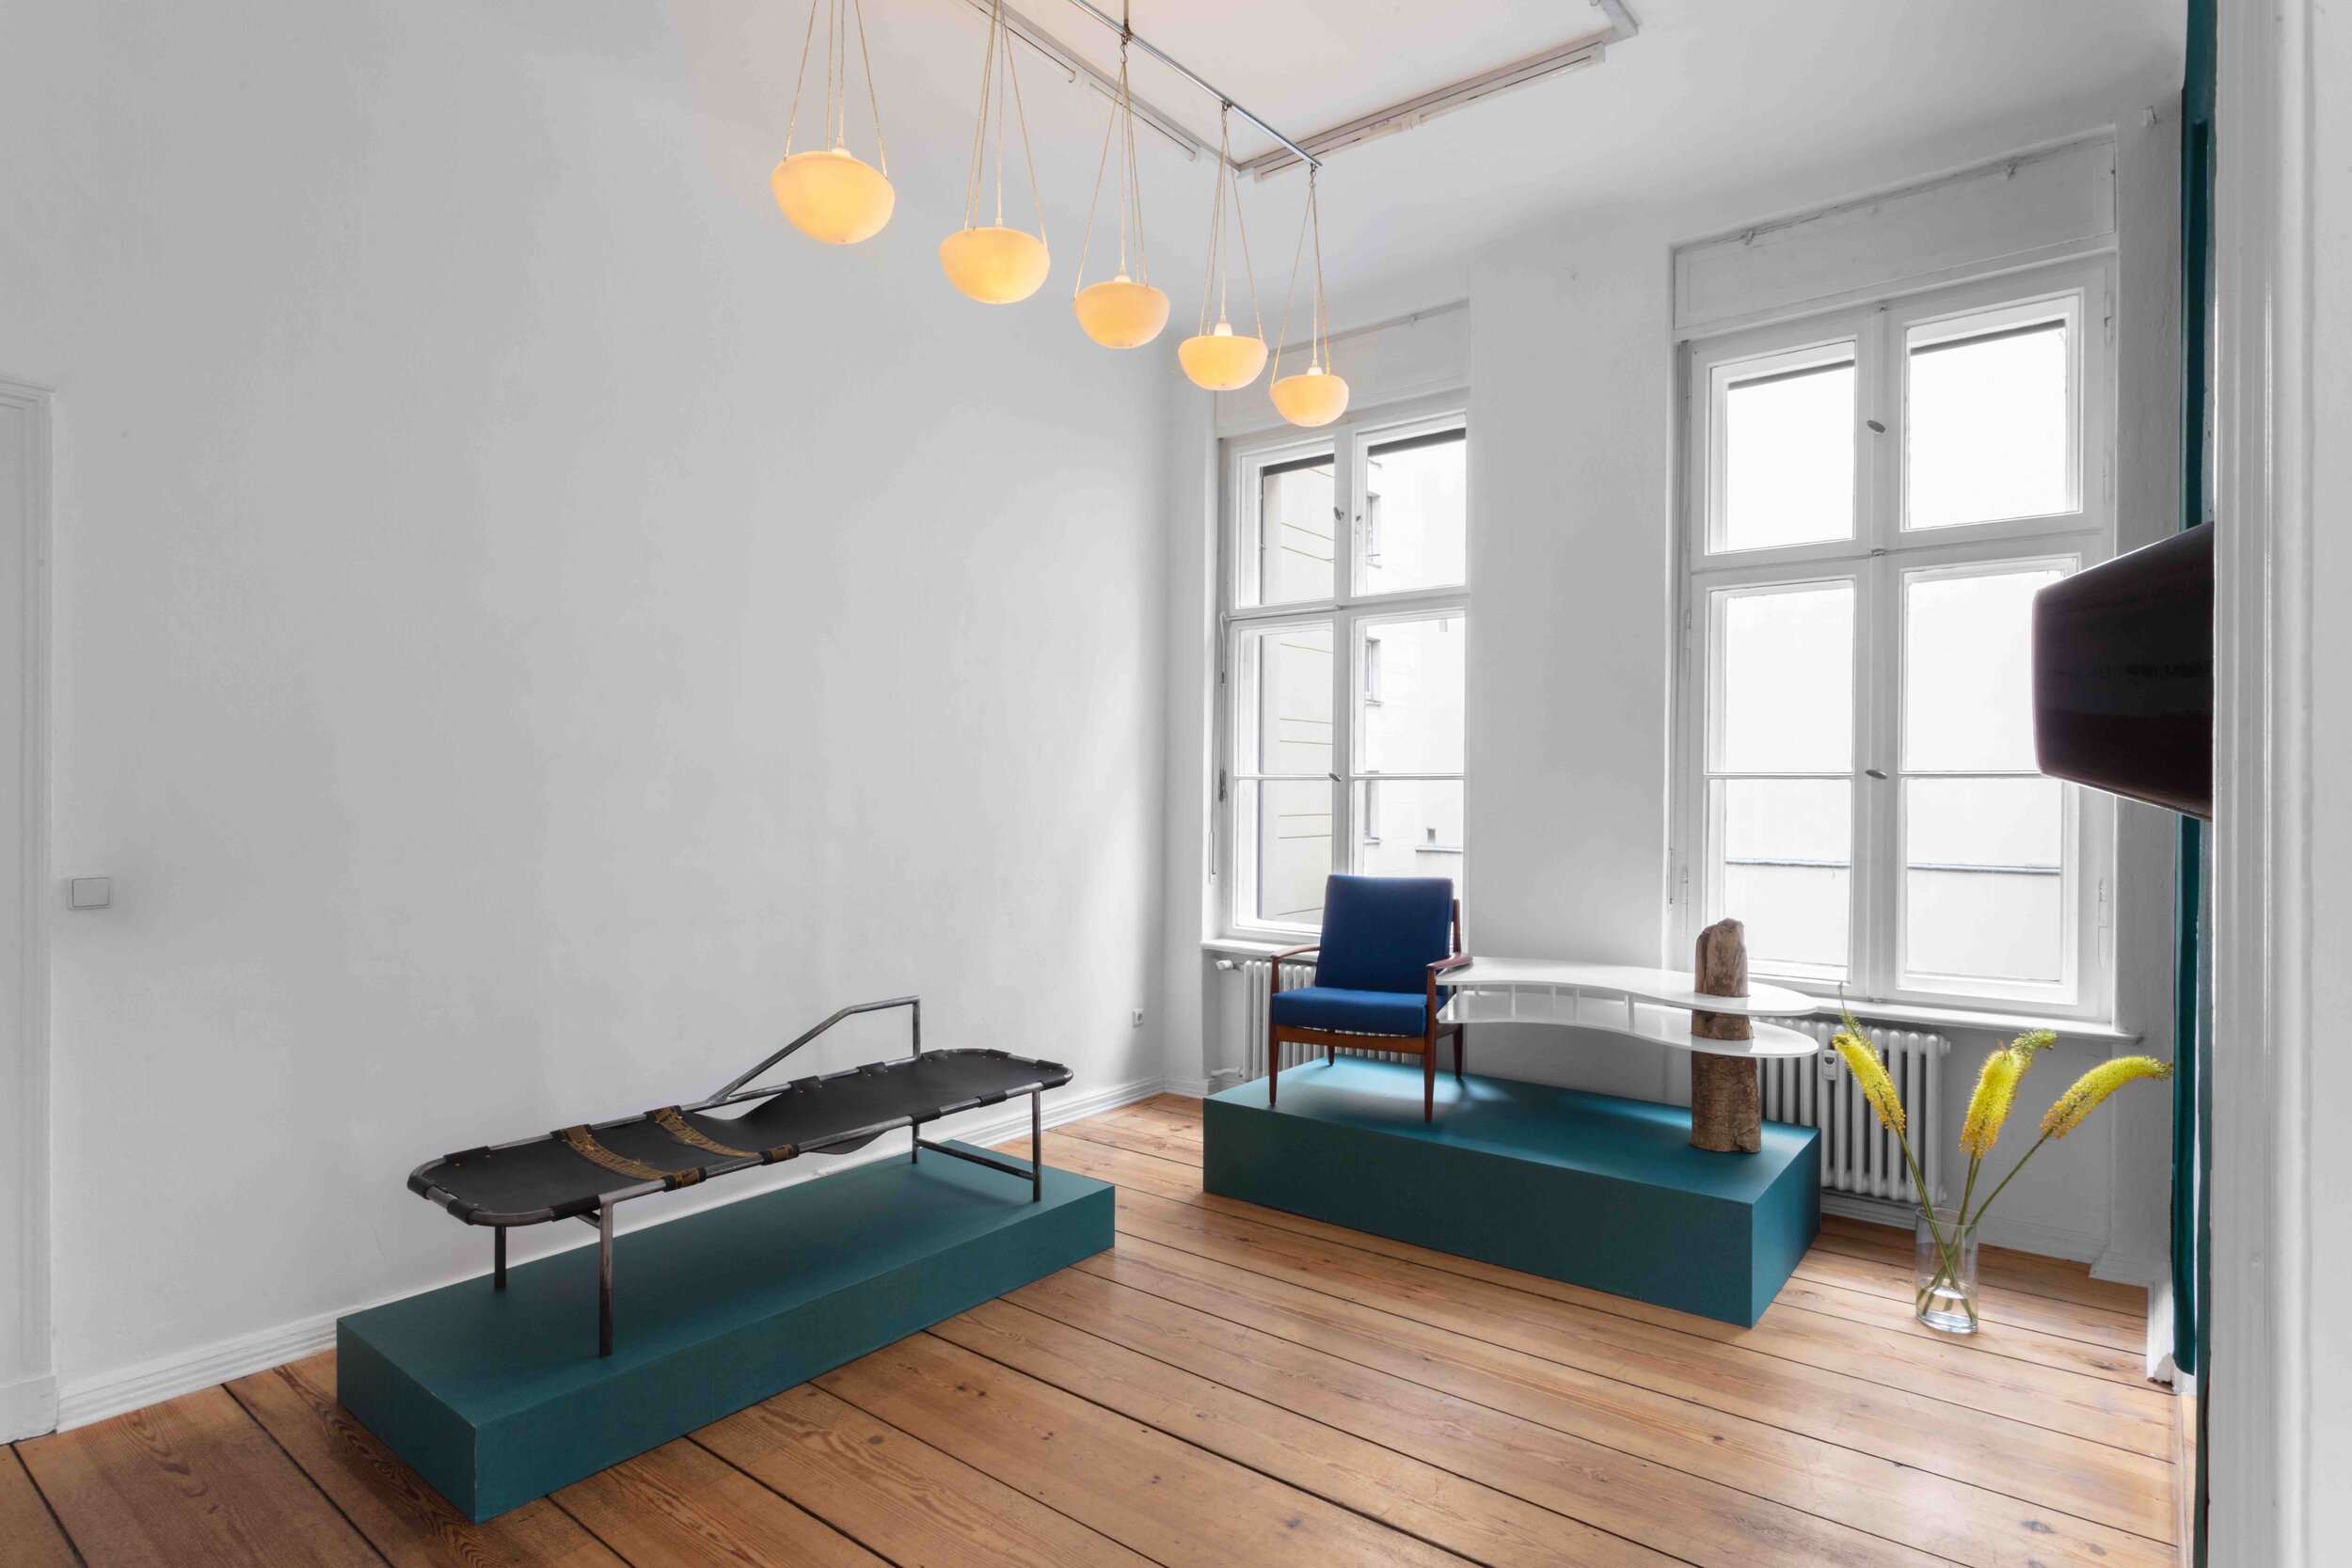  Protoypes:   SB2021 180/60 WW-CL black (Chaise Lounge with Spiders)   SE2021 160/75/35 GJ/AD blue (Blue Armchair)   SB2021 160/45/35 BL white (Baby Belly Lamp)  